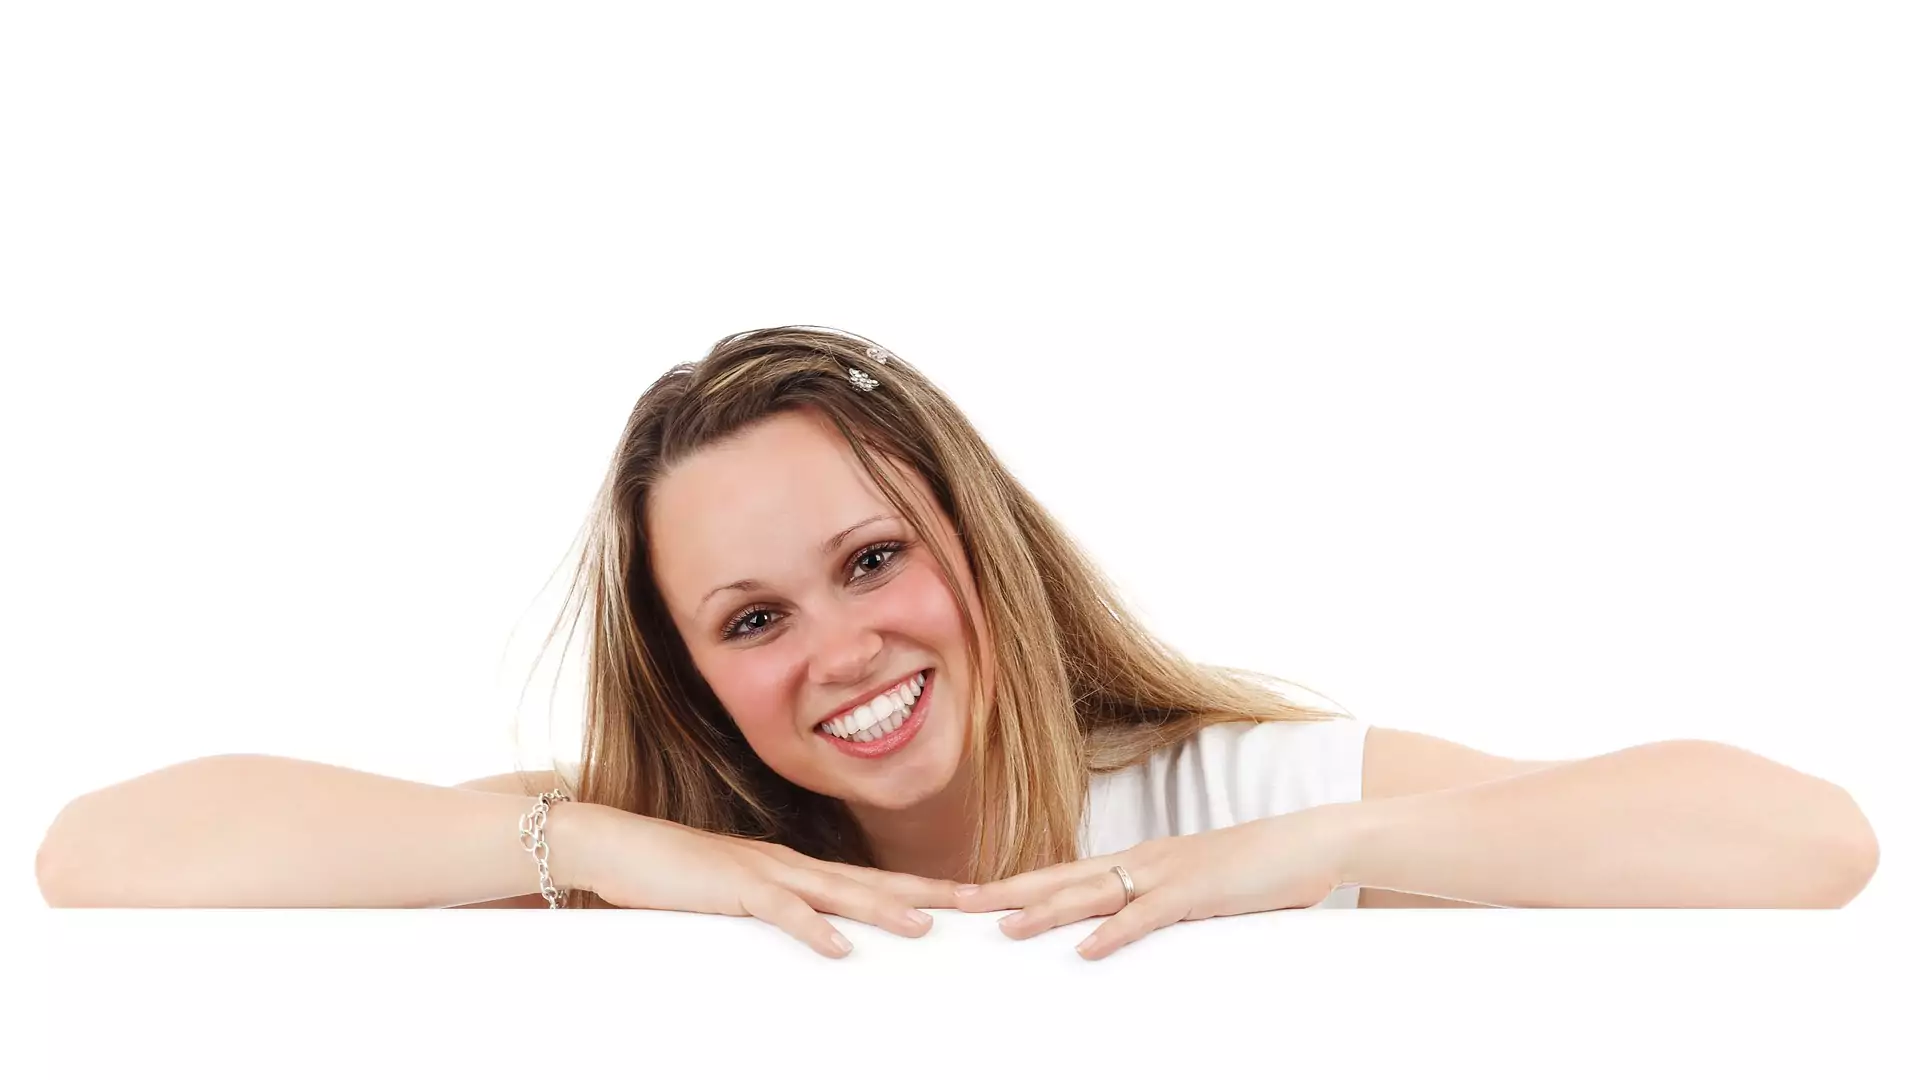 A smiling woman after receiving cosmetic dentistry treatment